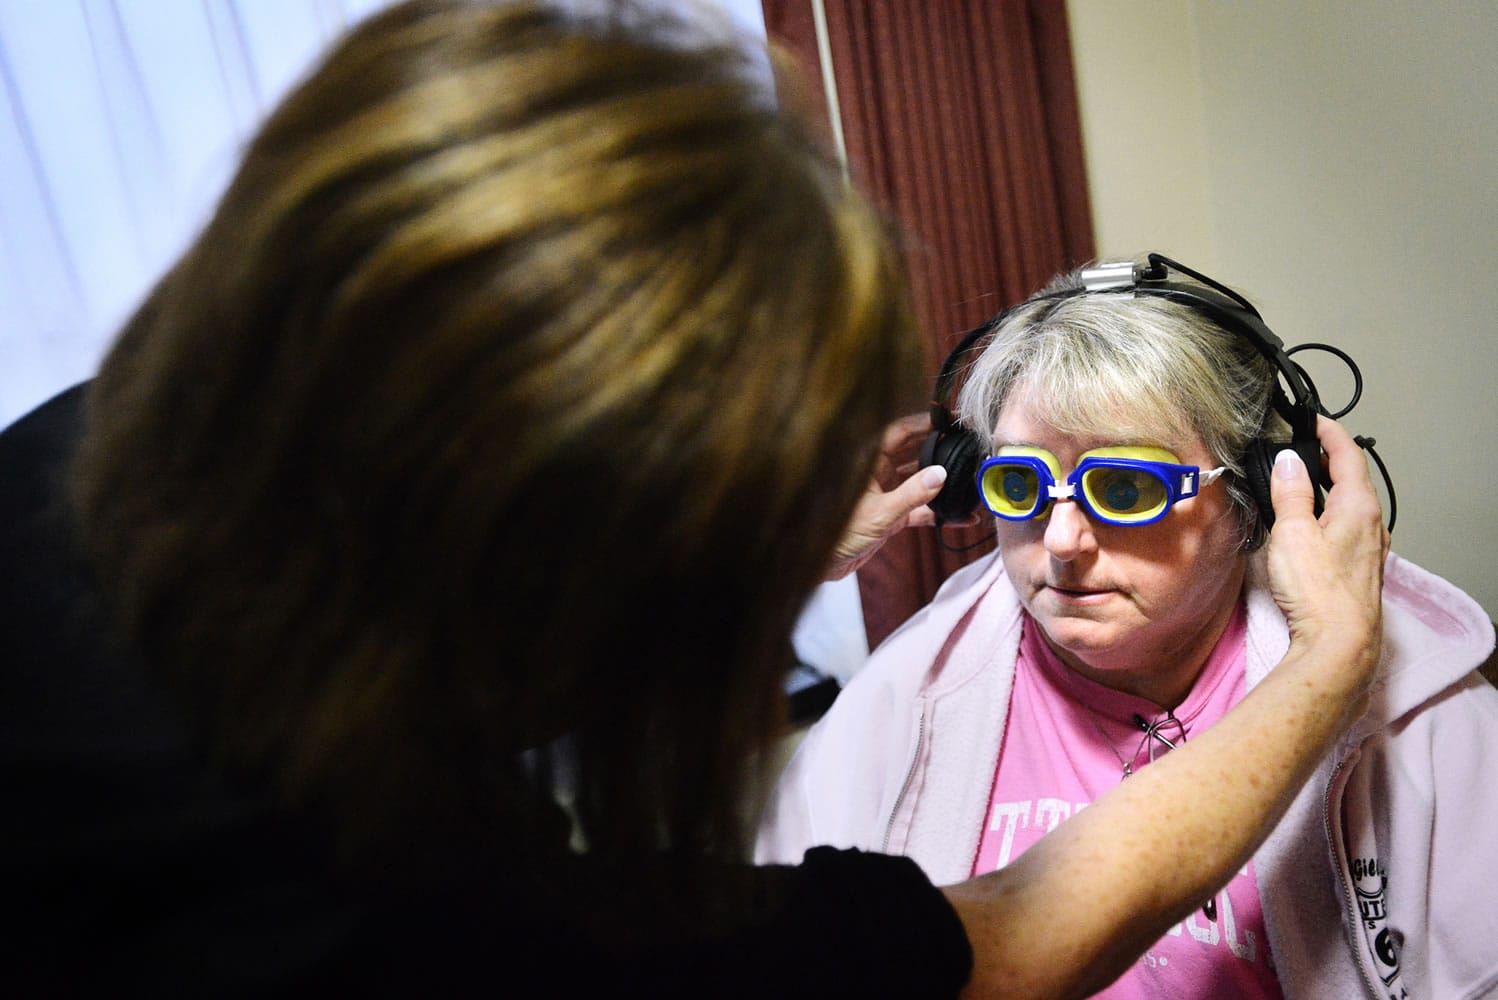 Gayle Yoder of Echo, Ore., has headphones placed on her ears by Kathy Thomas, a Good Shepherd health educator, before taking a virtual dementia tour in Hermiston, Ore.